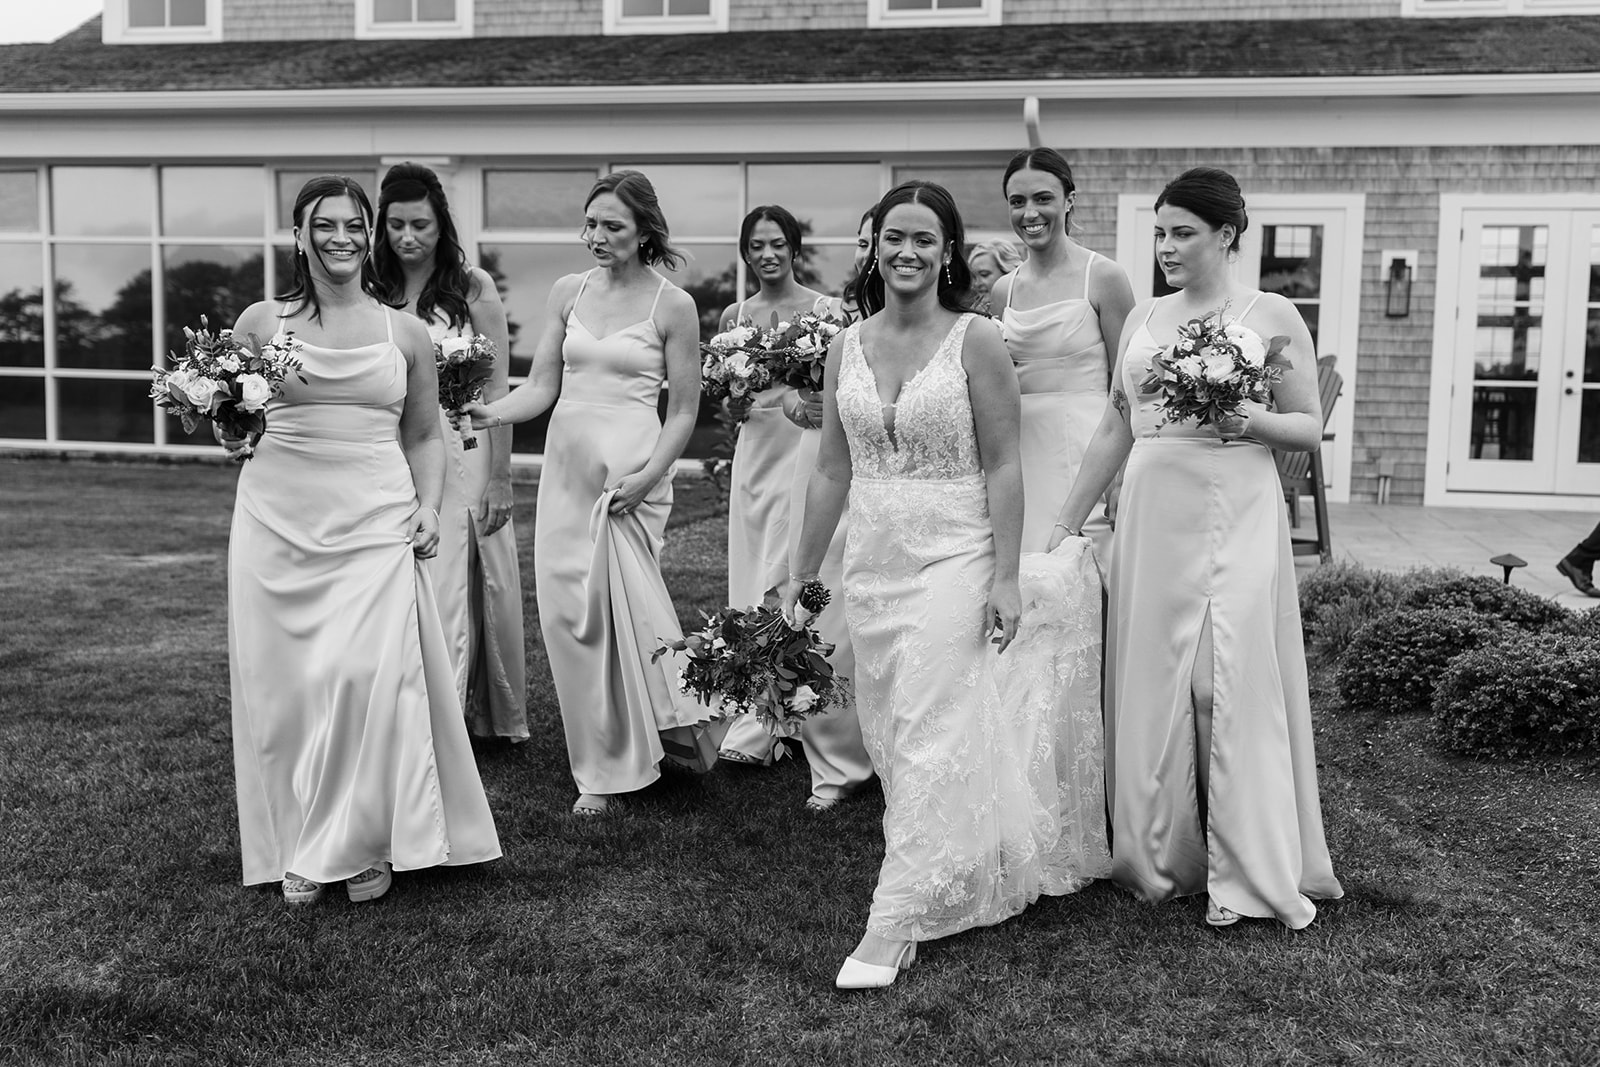 Bridesmaids pose together after the dreamy New England wedding